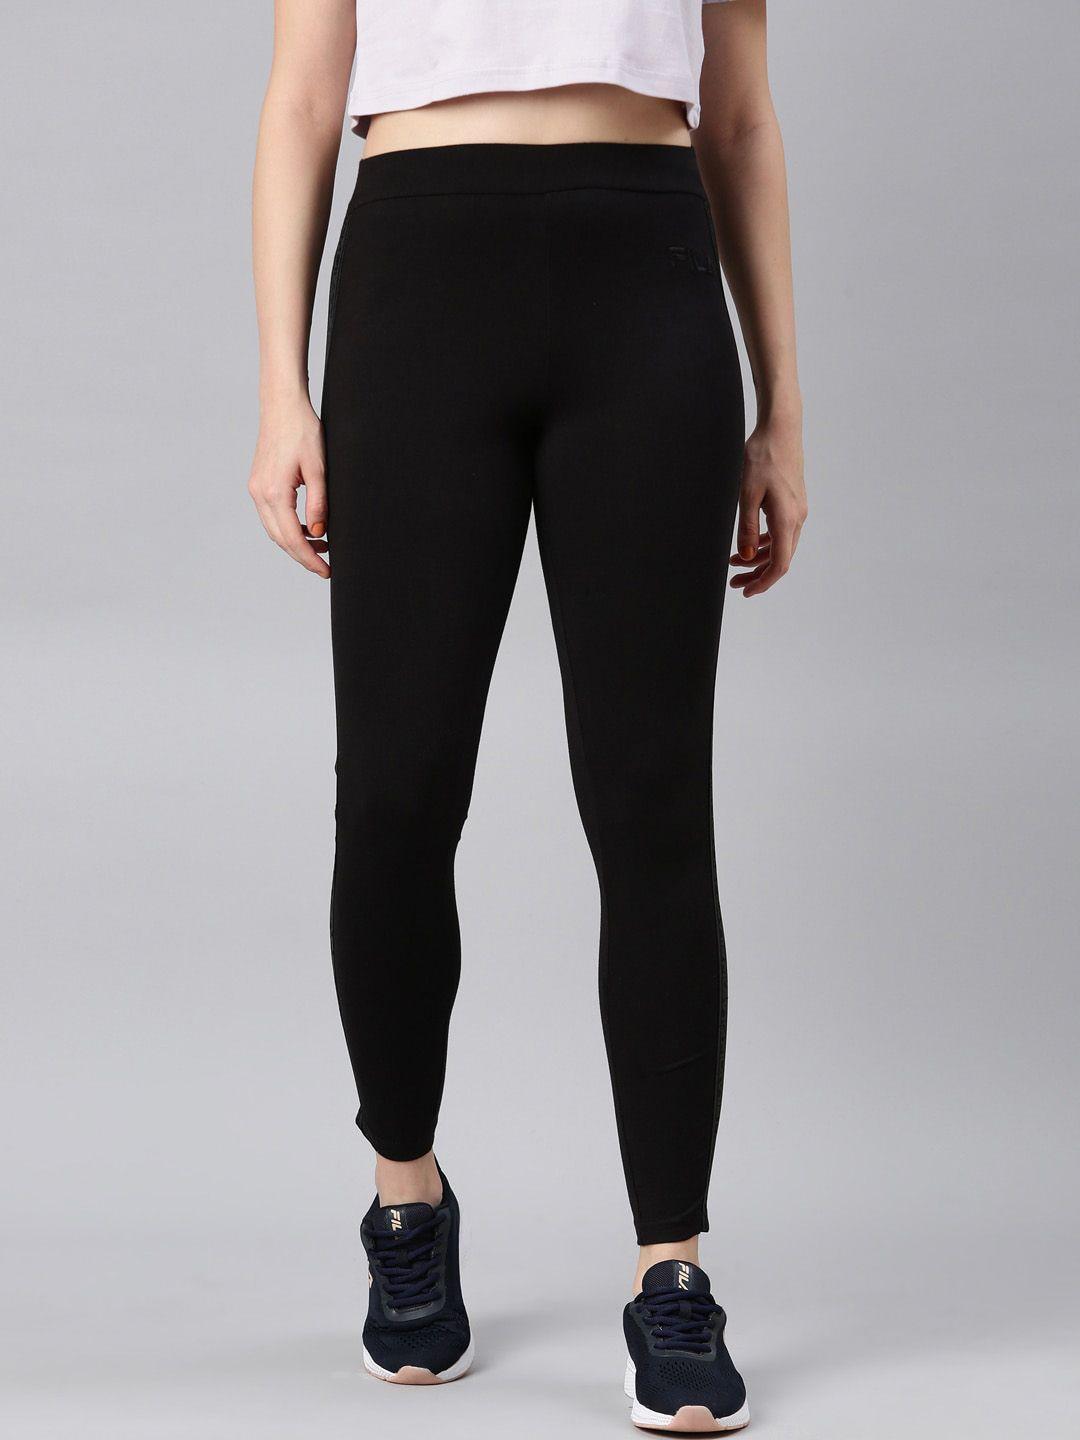 fila-women-high-rise-side-taping-activewear-tight